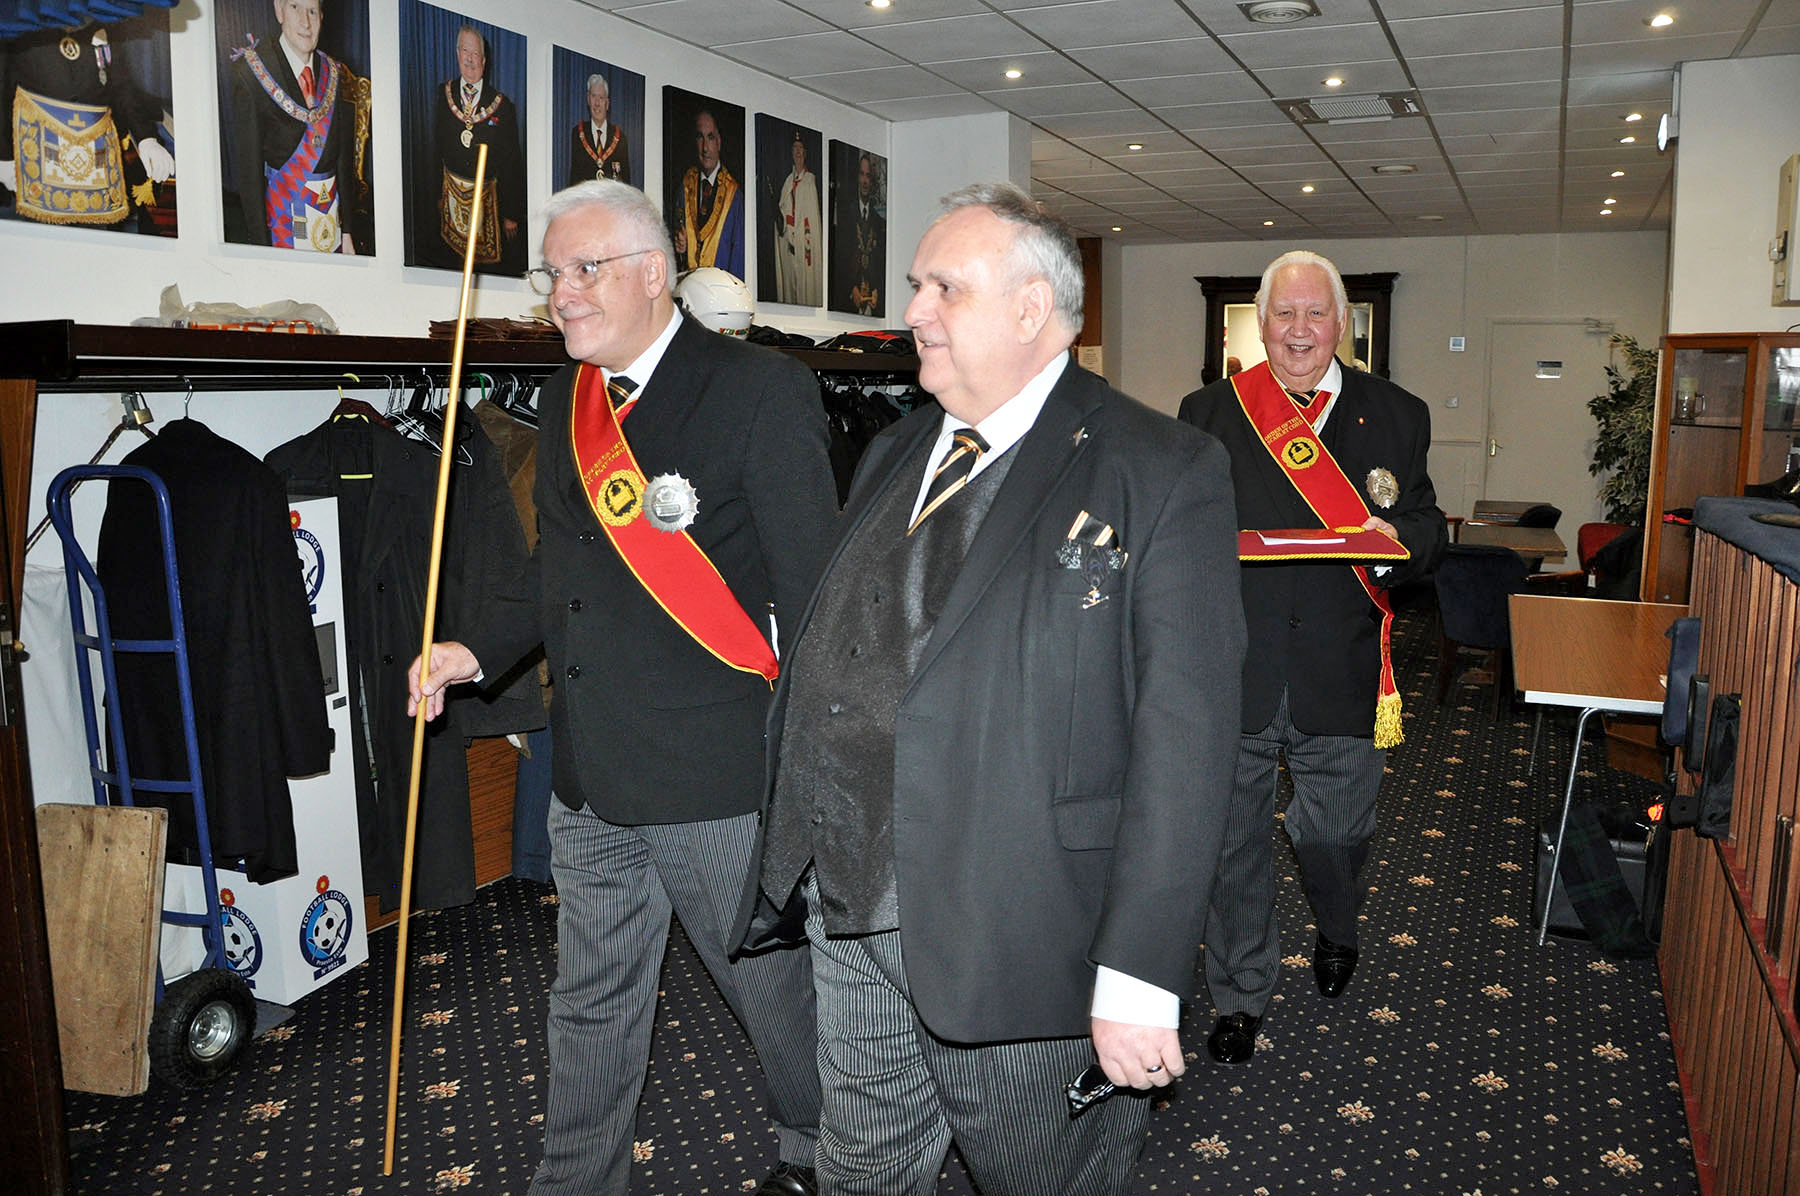 A new Provincial Grand Summus for Hampshire, Isle of Wight, and the Channel Islands